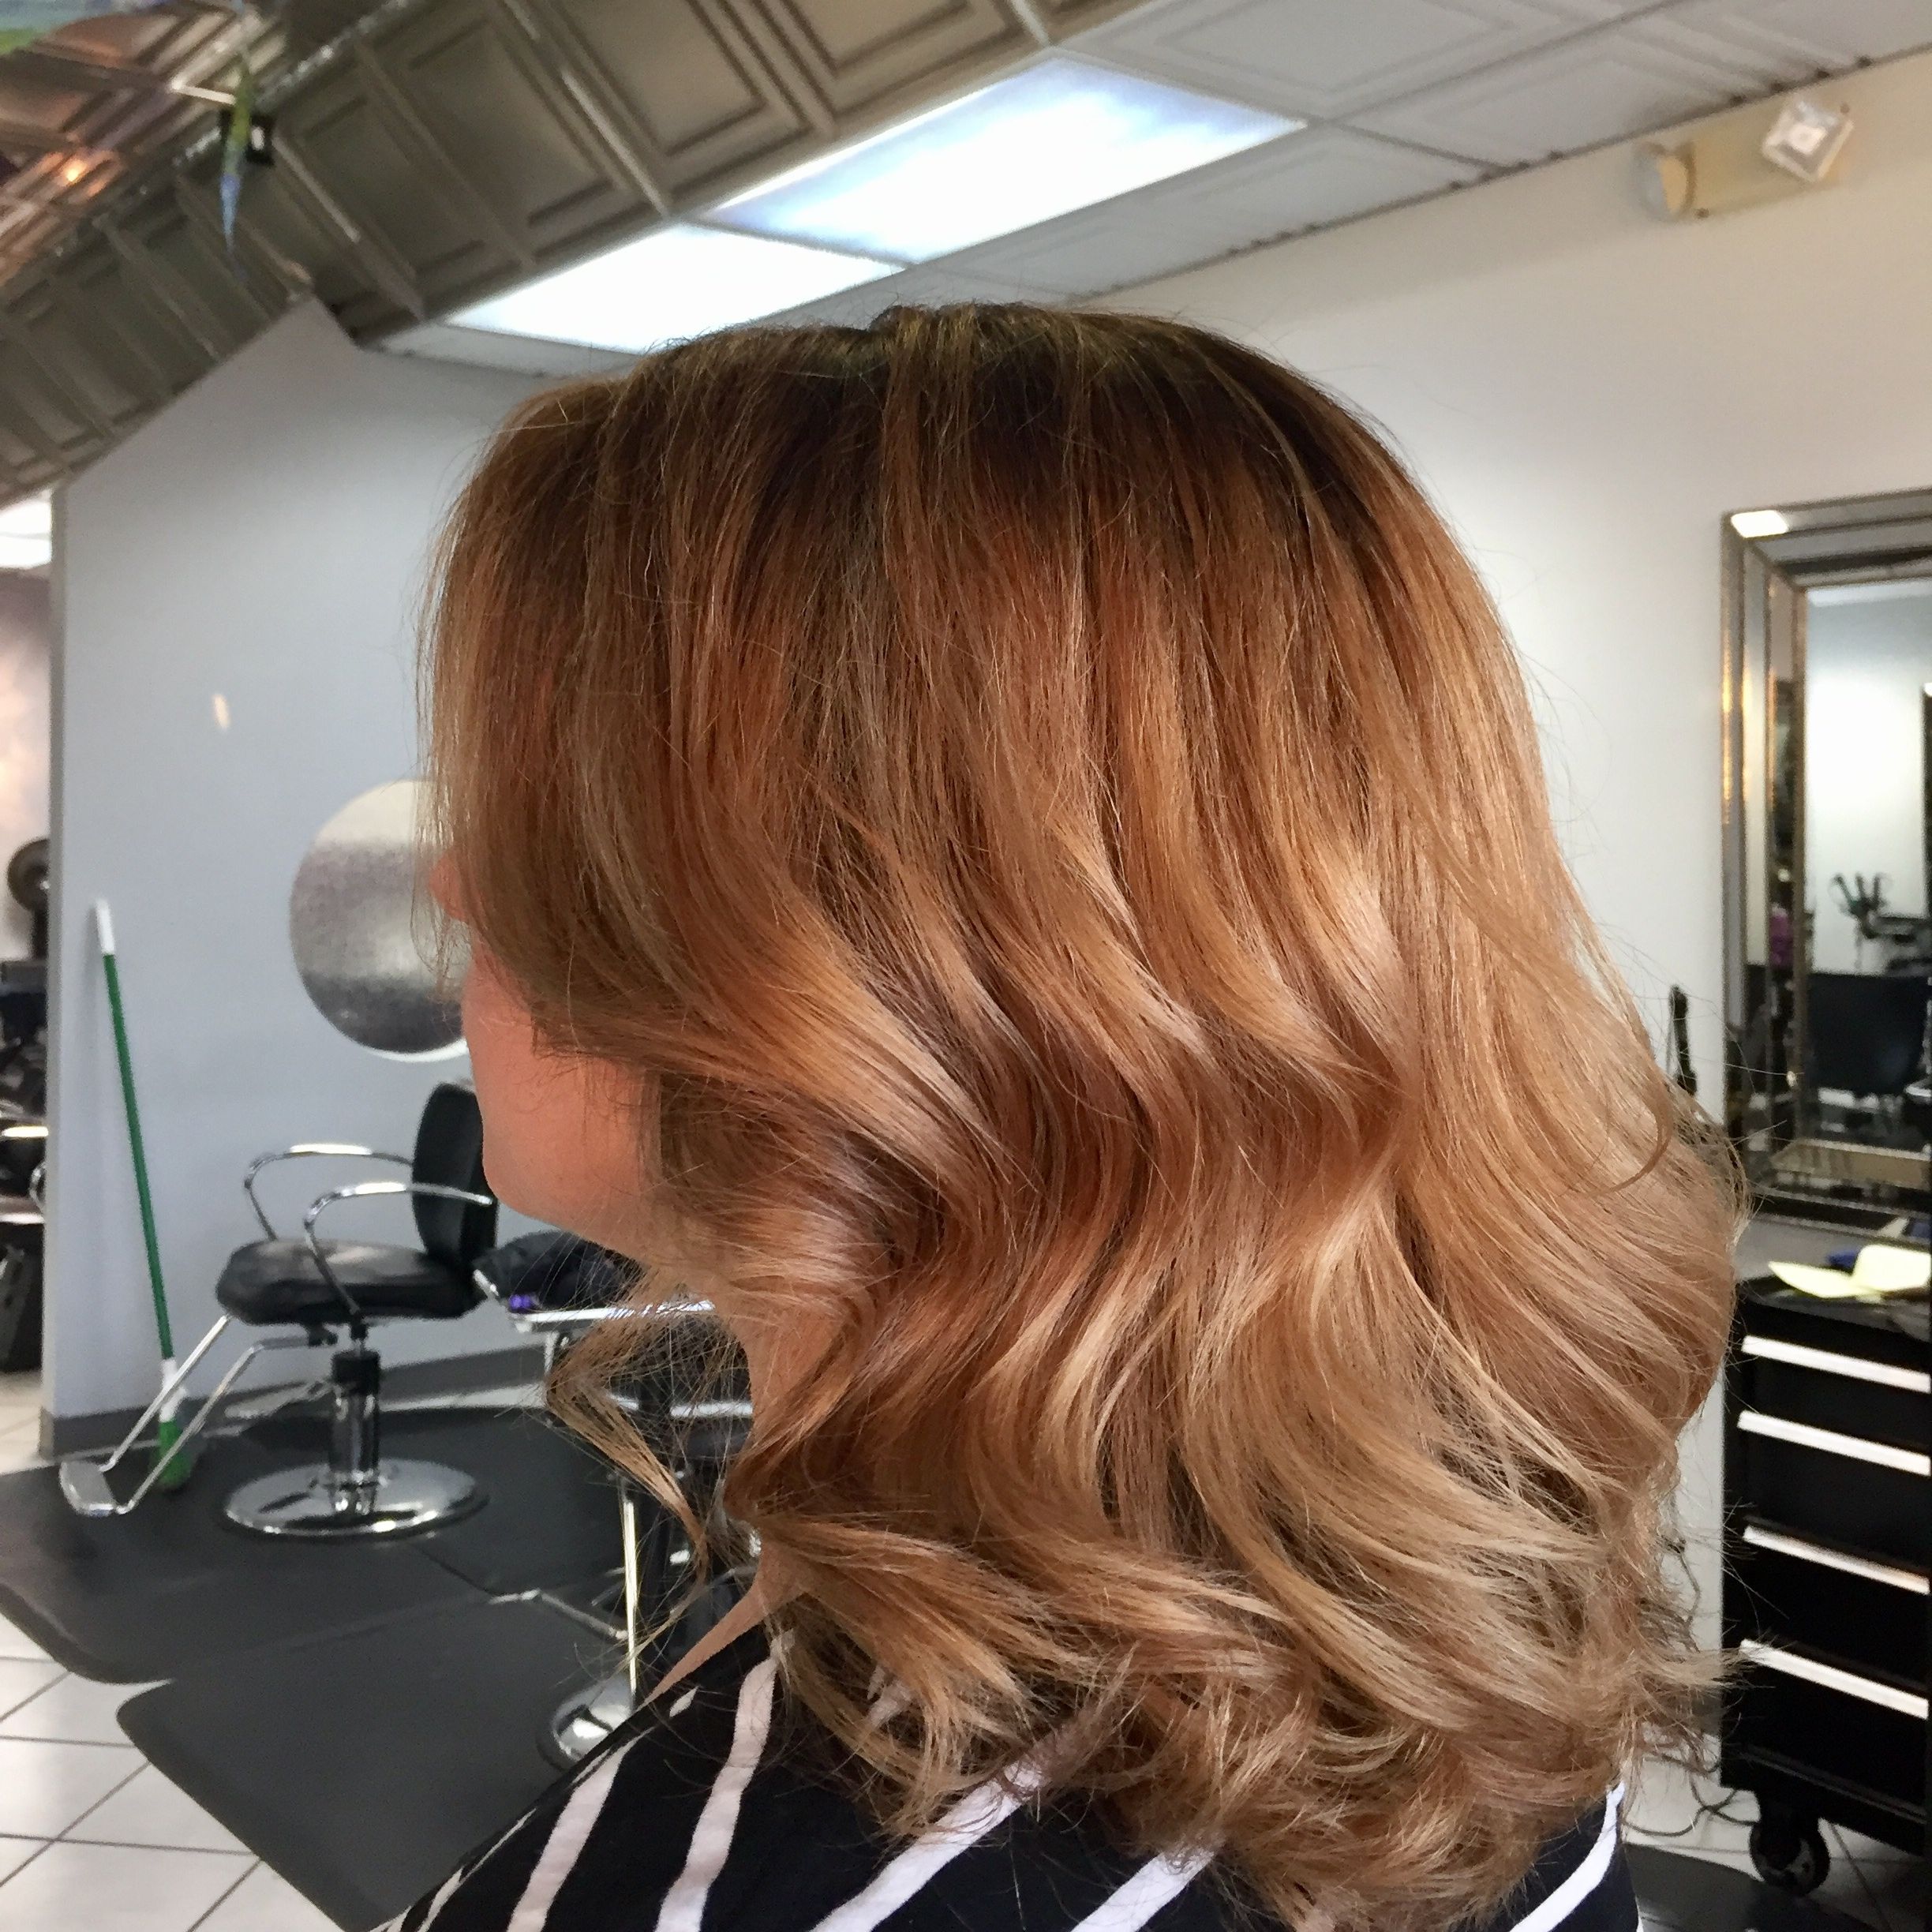 Hair Extension in Livonia, Michigan